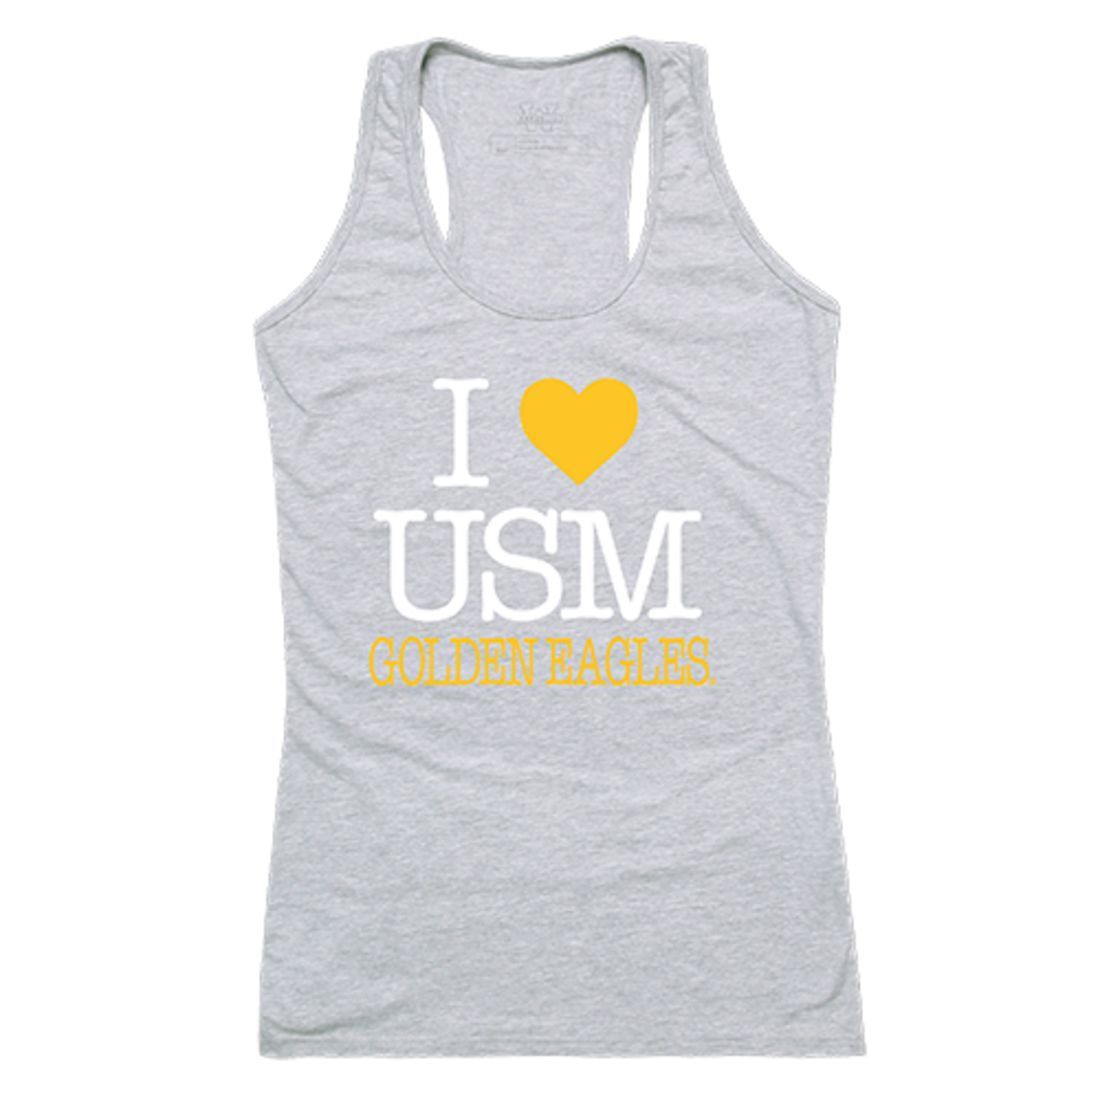 USM University of Southern Mississippi Golden Eagles Womens Love Tank Top Tee T-Shirt Heather Grey-Campus-Wardrobe